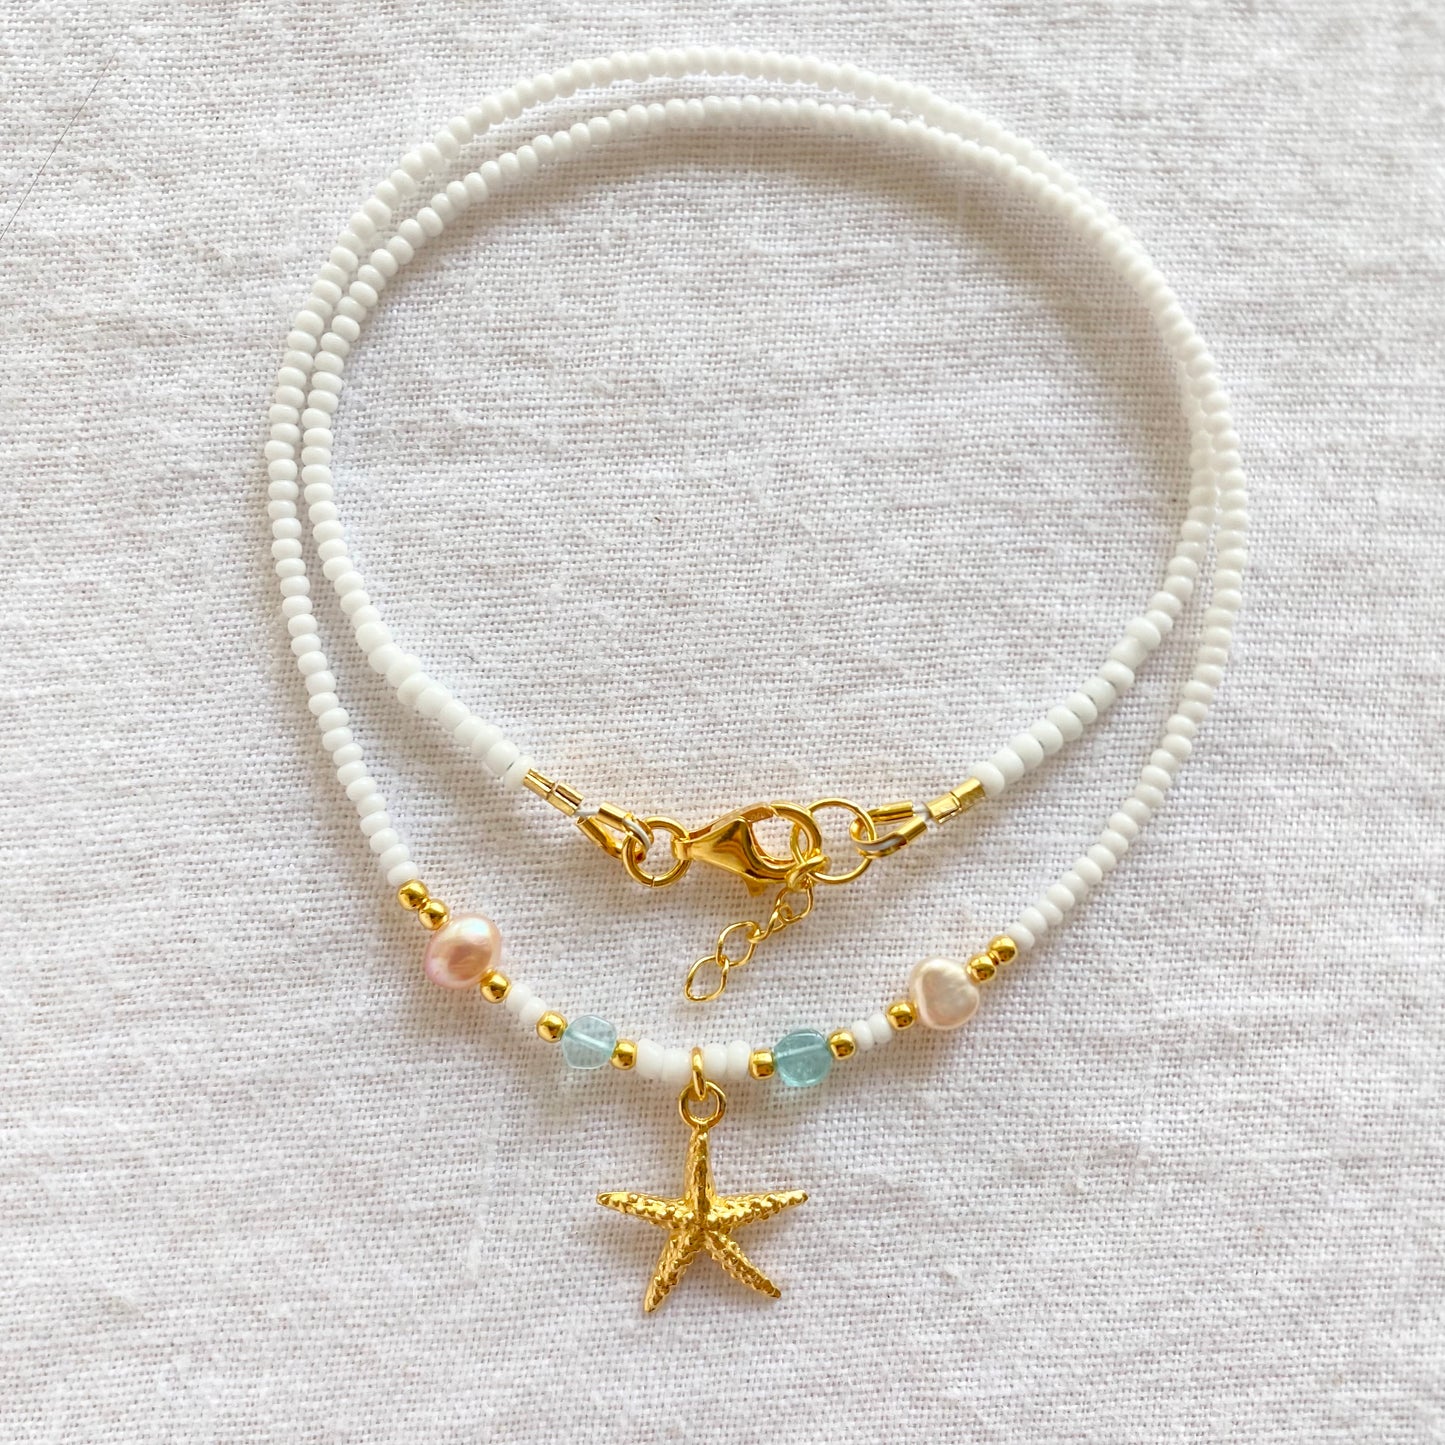 Sunlit Starfish Necklace 24k Gold plated sterling silver